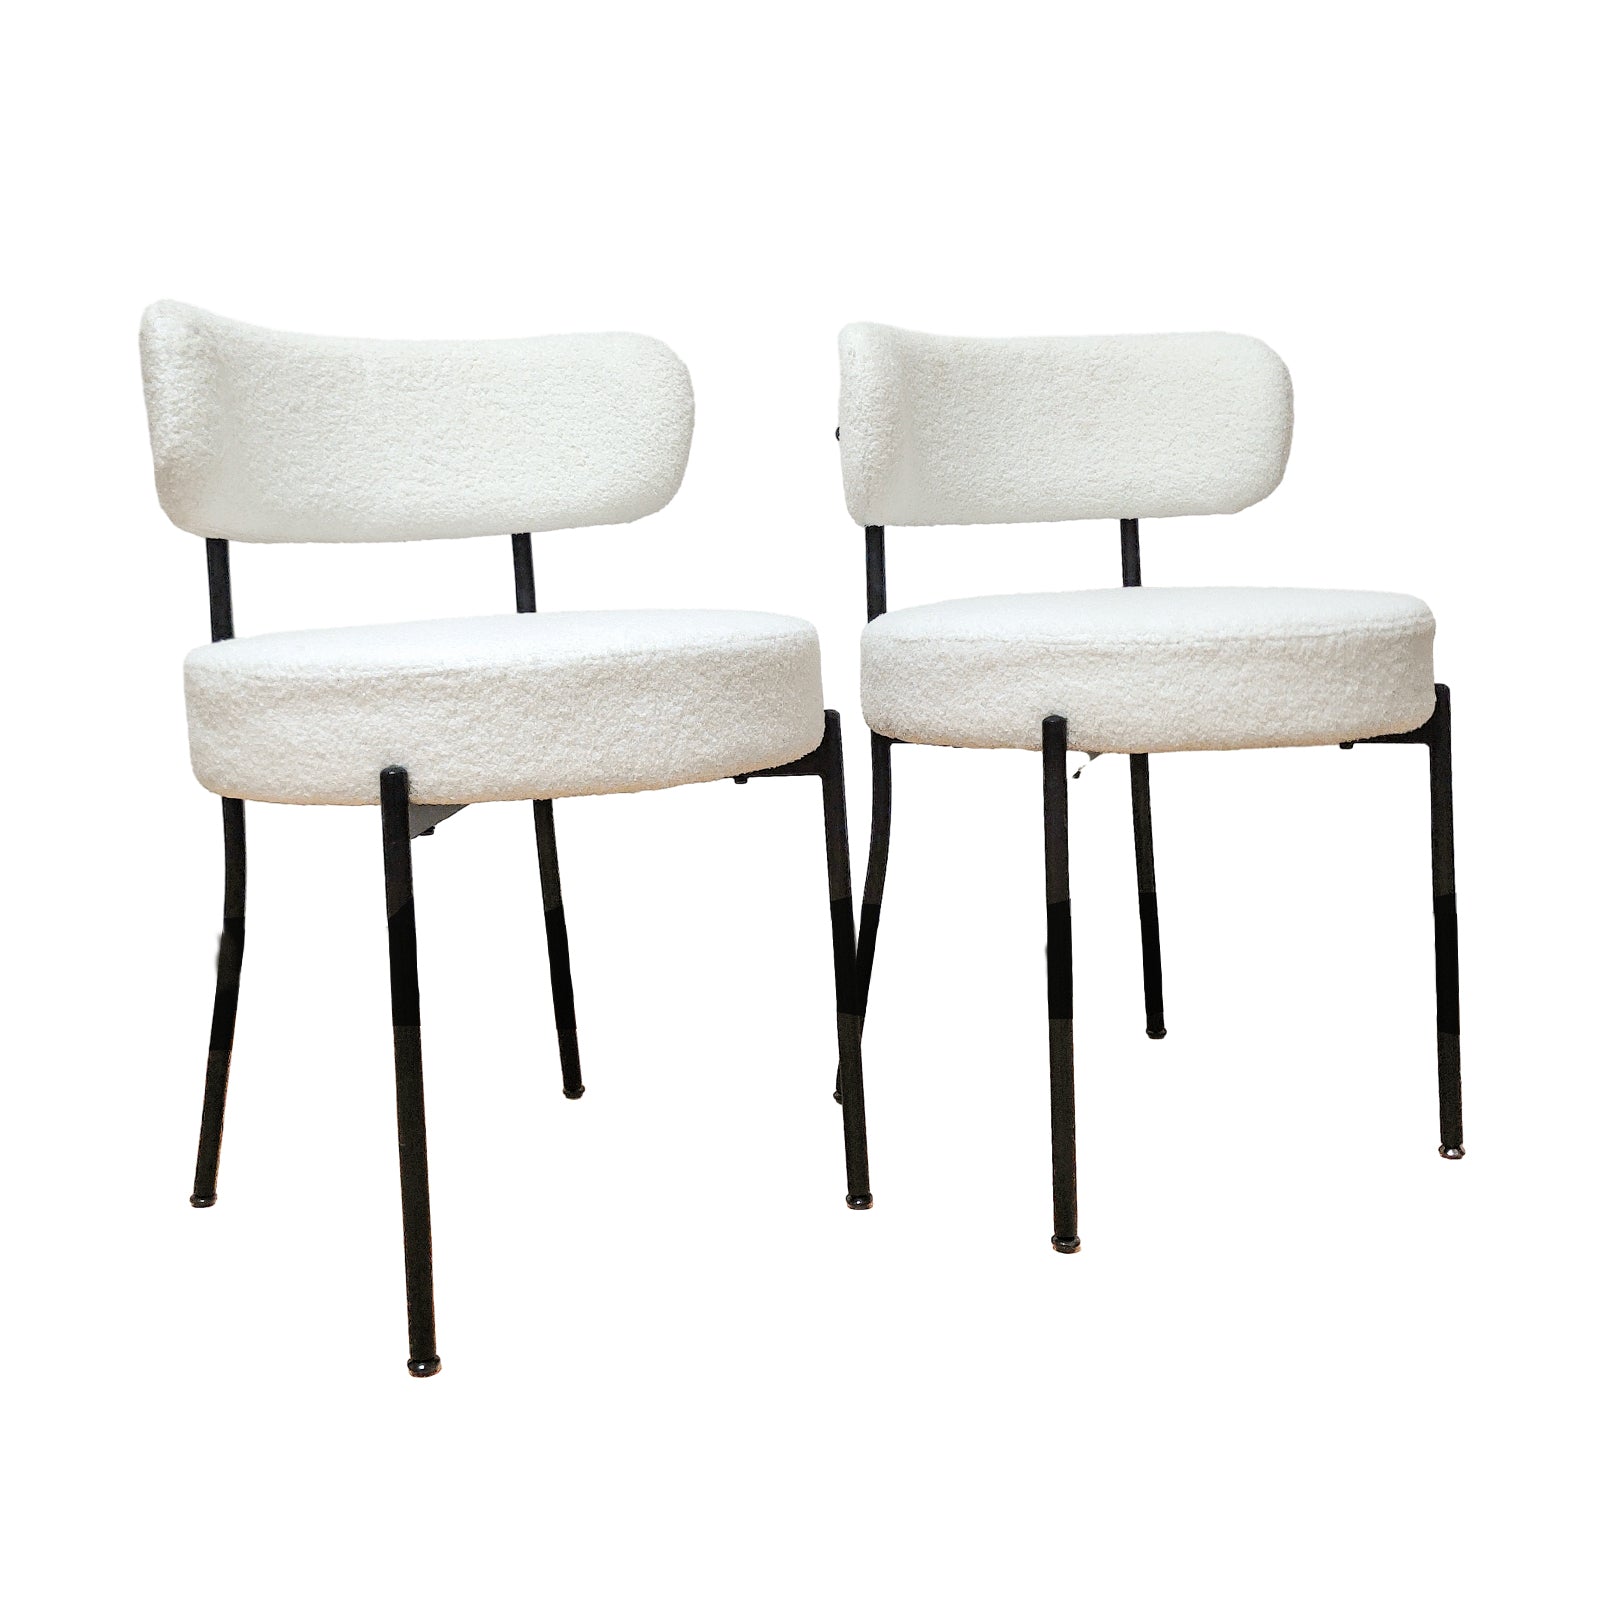 White Dining Chairs Set Of 4, Mid Century Modern